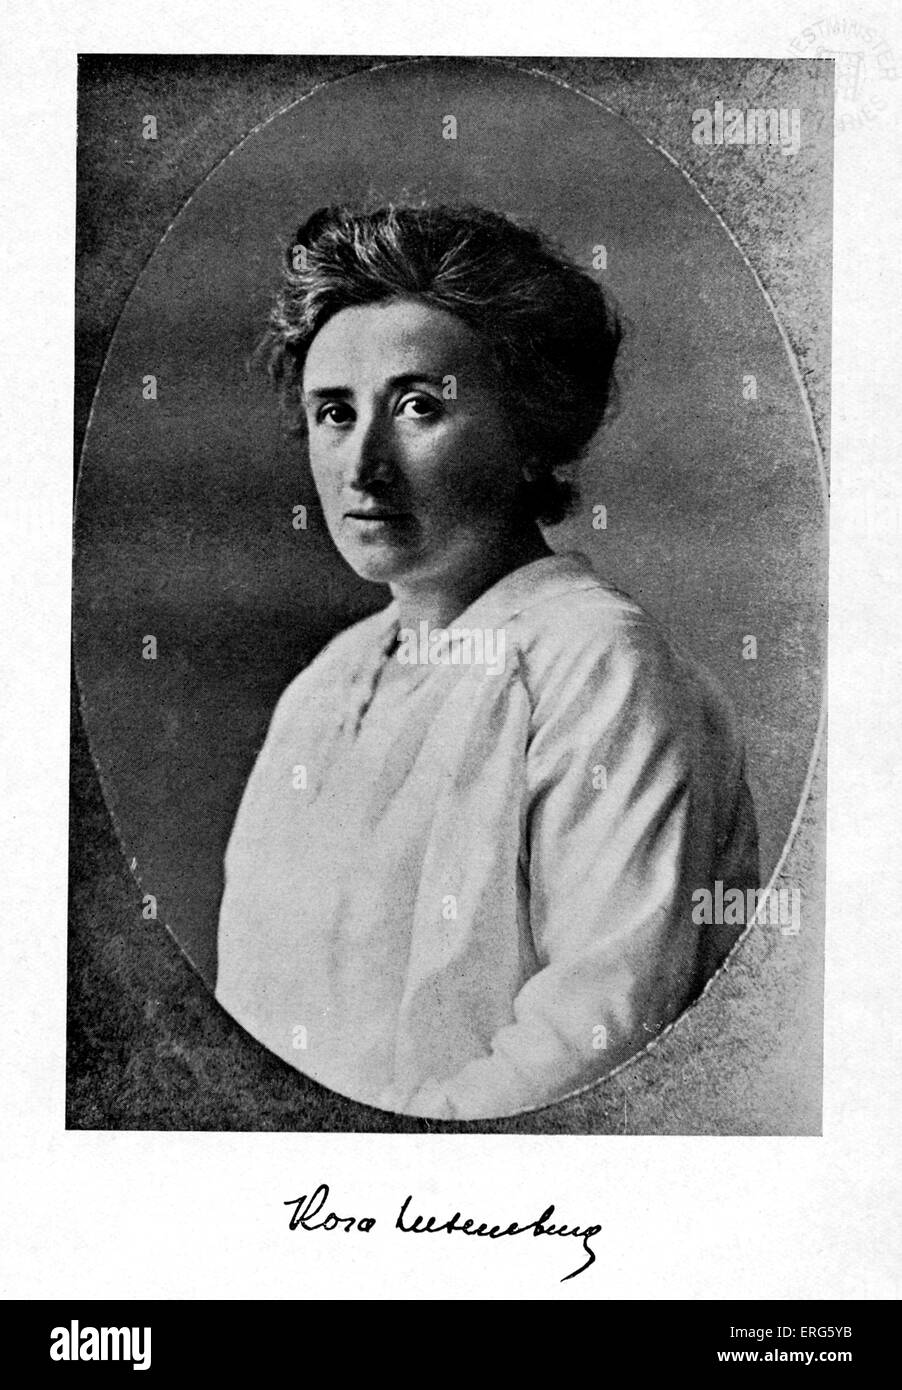 Rosa Luxemburg - portrait of the German political theorist 5 March 1870 or 1871- 15 January 1919. Stock Photo